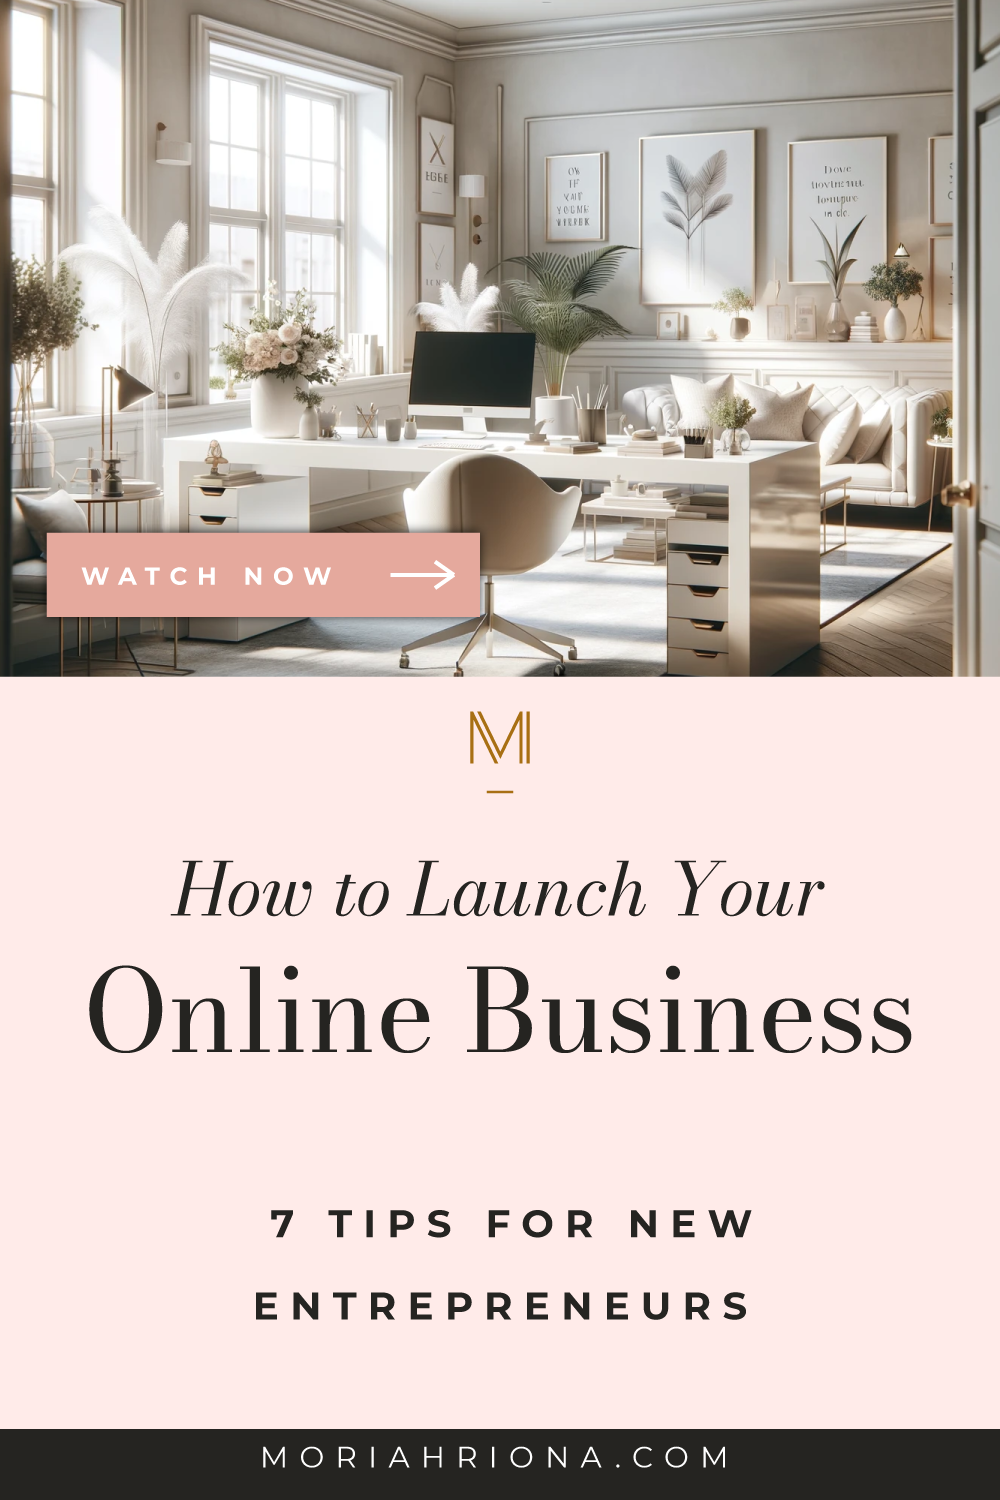 Wish you could start your coaching business, but don’t feel “ready”? This blog post is for you! I’m sharing my mindset tip stash—so you can ditch your fears, become a life coach, and build the online coaching business of your dreams! #luxurybrand #lifecoach #lifecoaching #entrepreneurtips